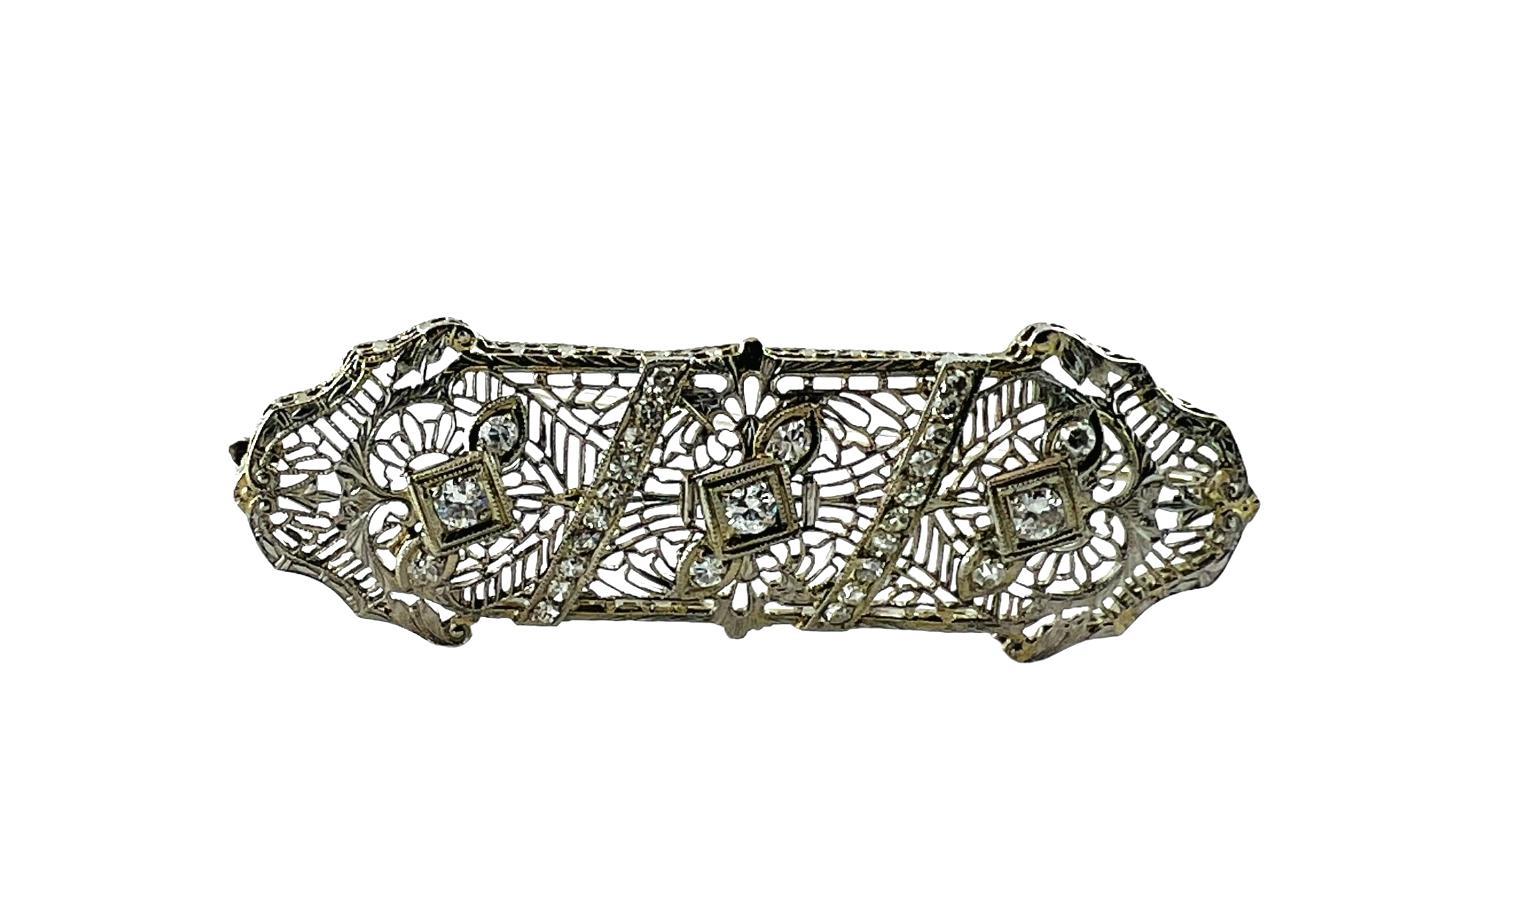 Beautiful14K white gold long antique Art Deco lacy filigree diamond brooch pin.

Circa 1920-1930

3 single diamonds representing flowers with diamond leaves on either side are spaced apart by 2 bars of sparkling diamonds.

Brooch measures: 2 13/16